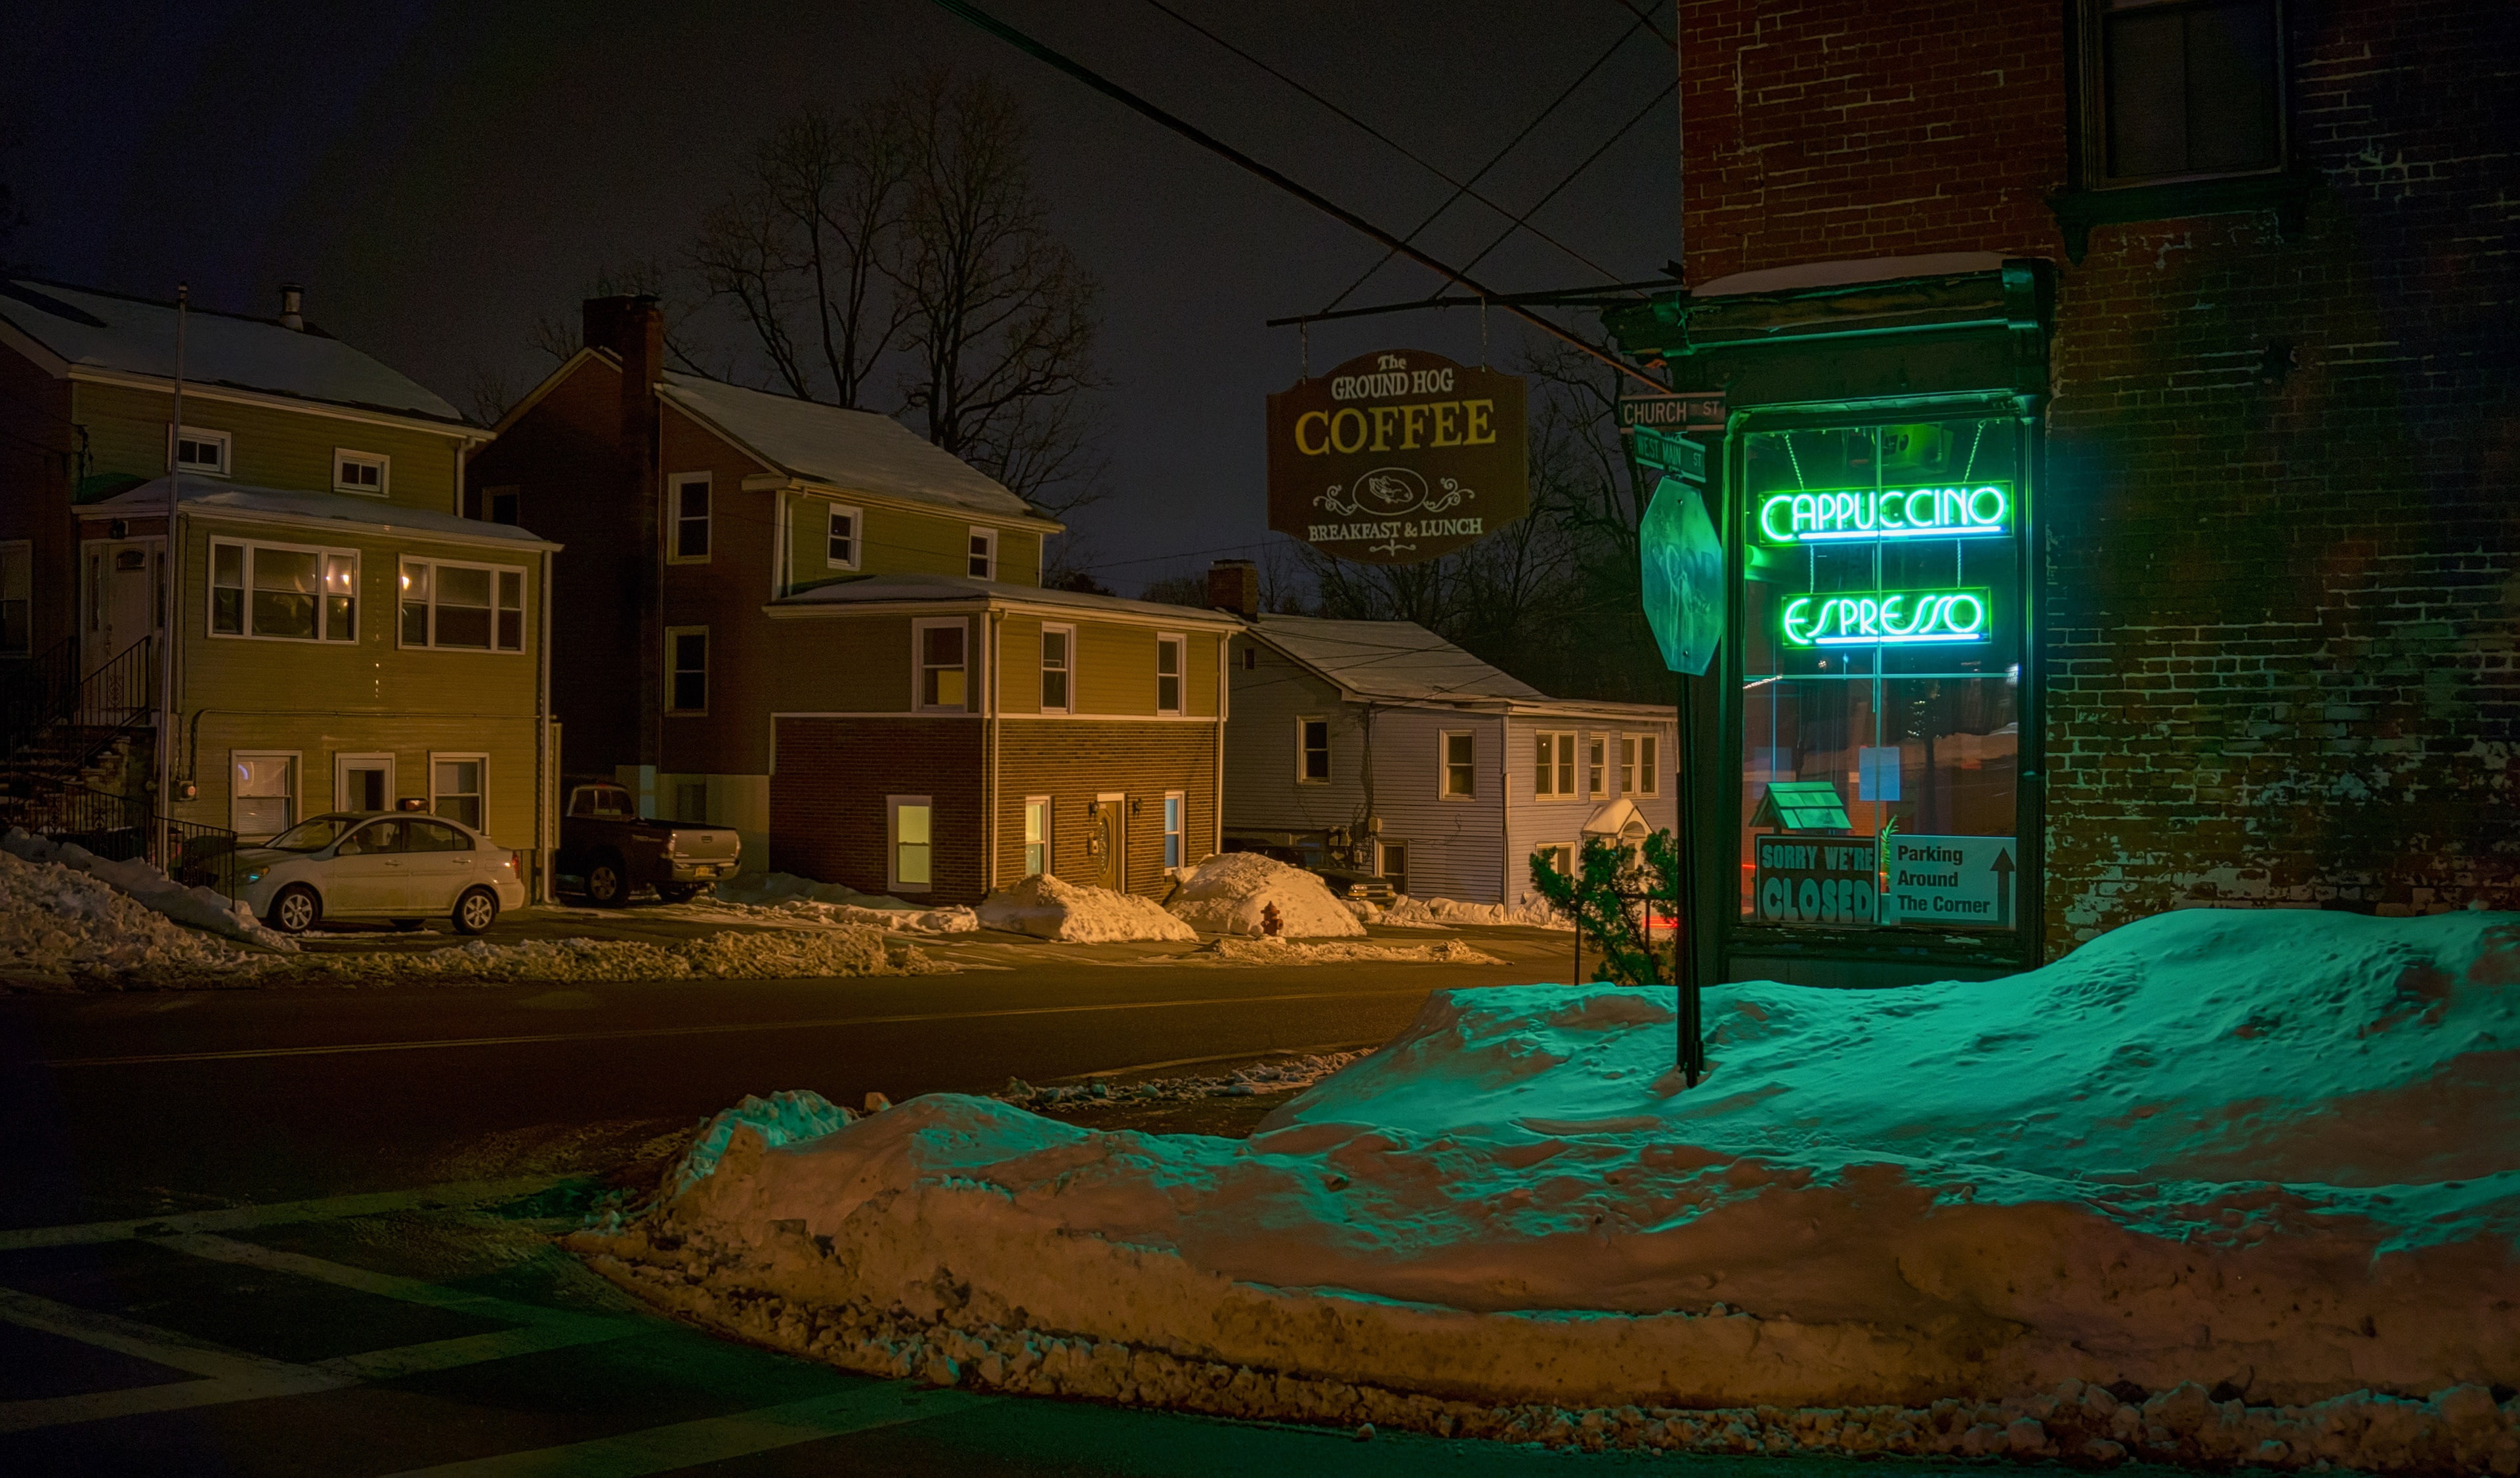 winter, the city, street, the evening, Ground Hog Cafe, Wappingers Falls